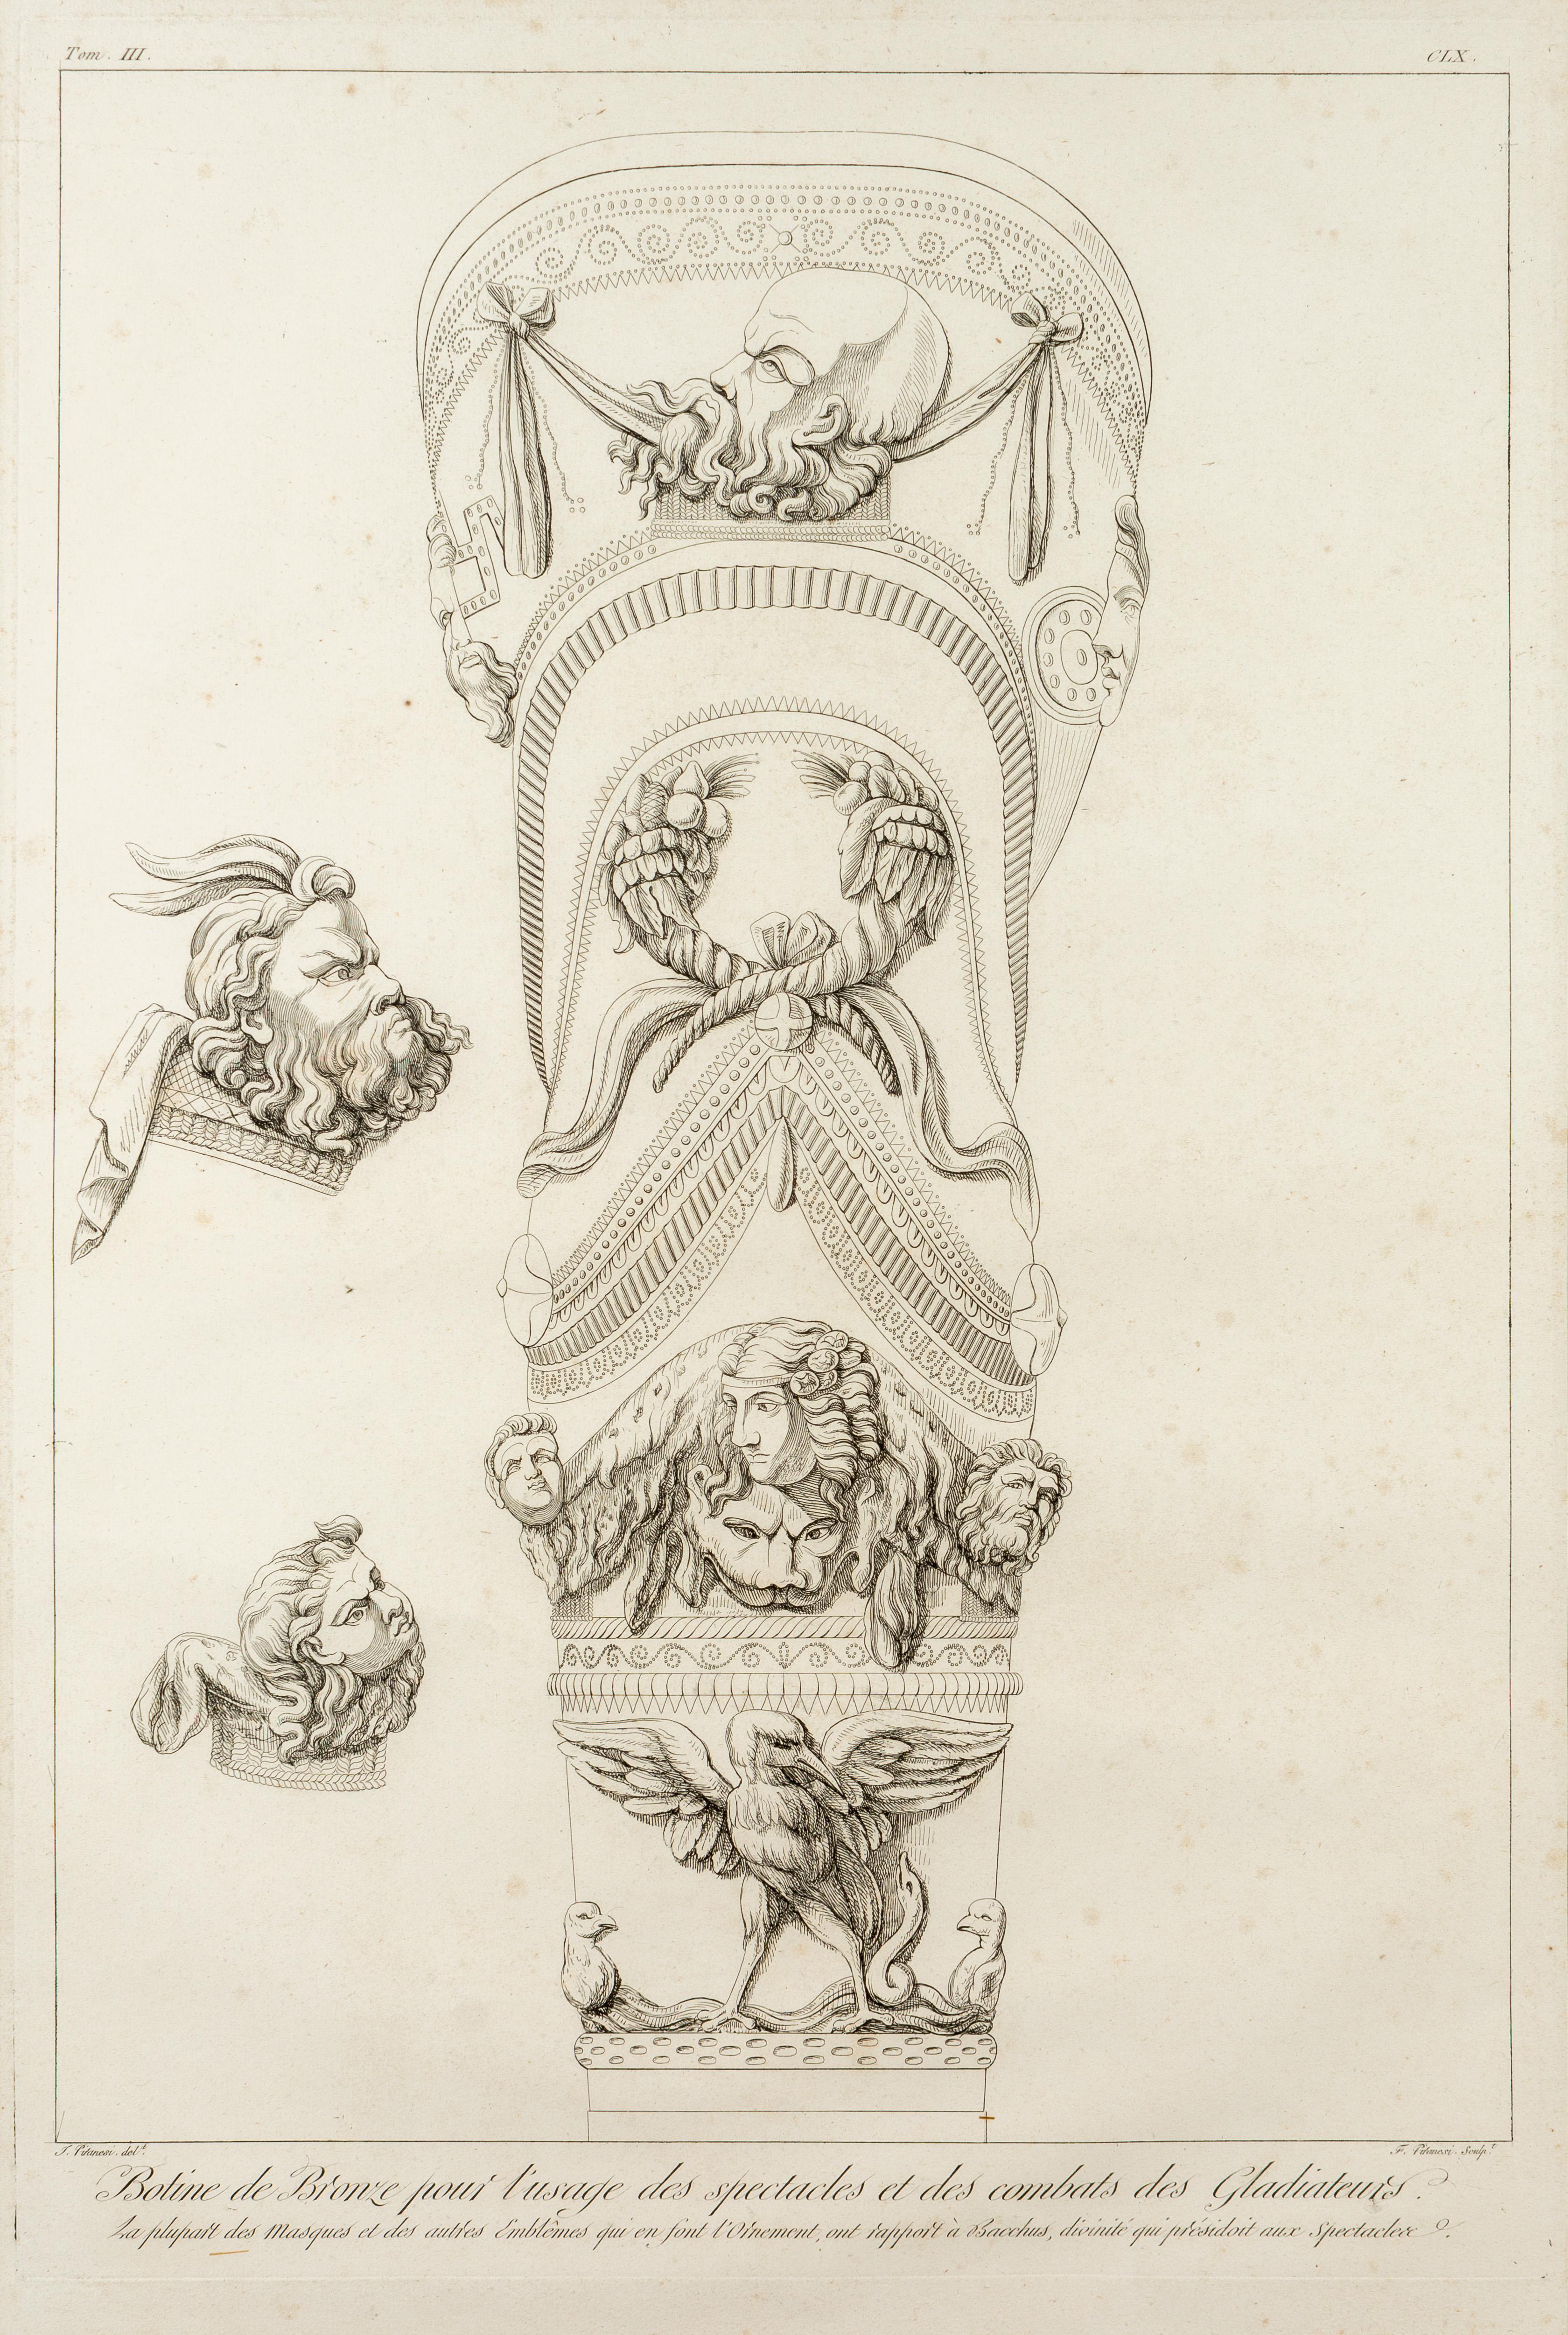 A large 19th Century engraving by Giovanni Battista Piranesi depicting the decoration on the leg armor worn by a Roman gladiator. The illustration includes masks and emblems of Bacchus. Printed in Paris from the artist's original plates by his son